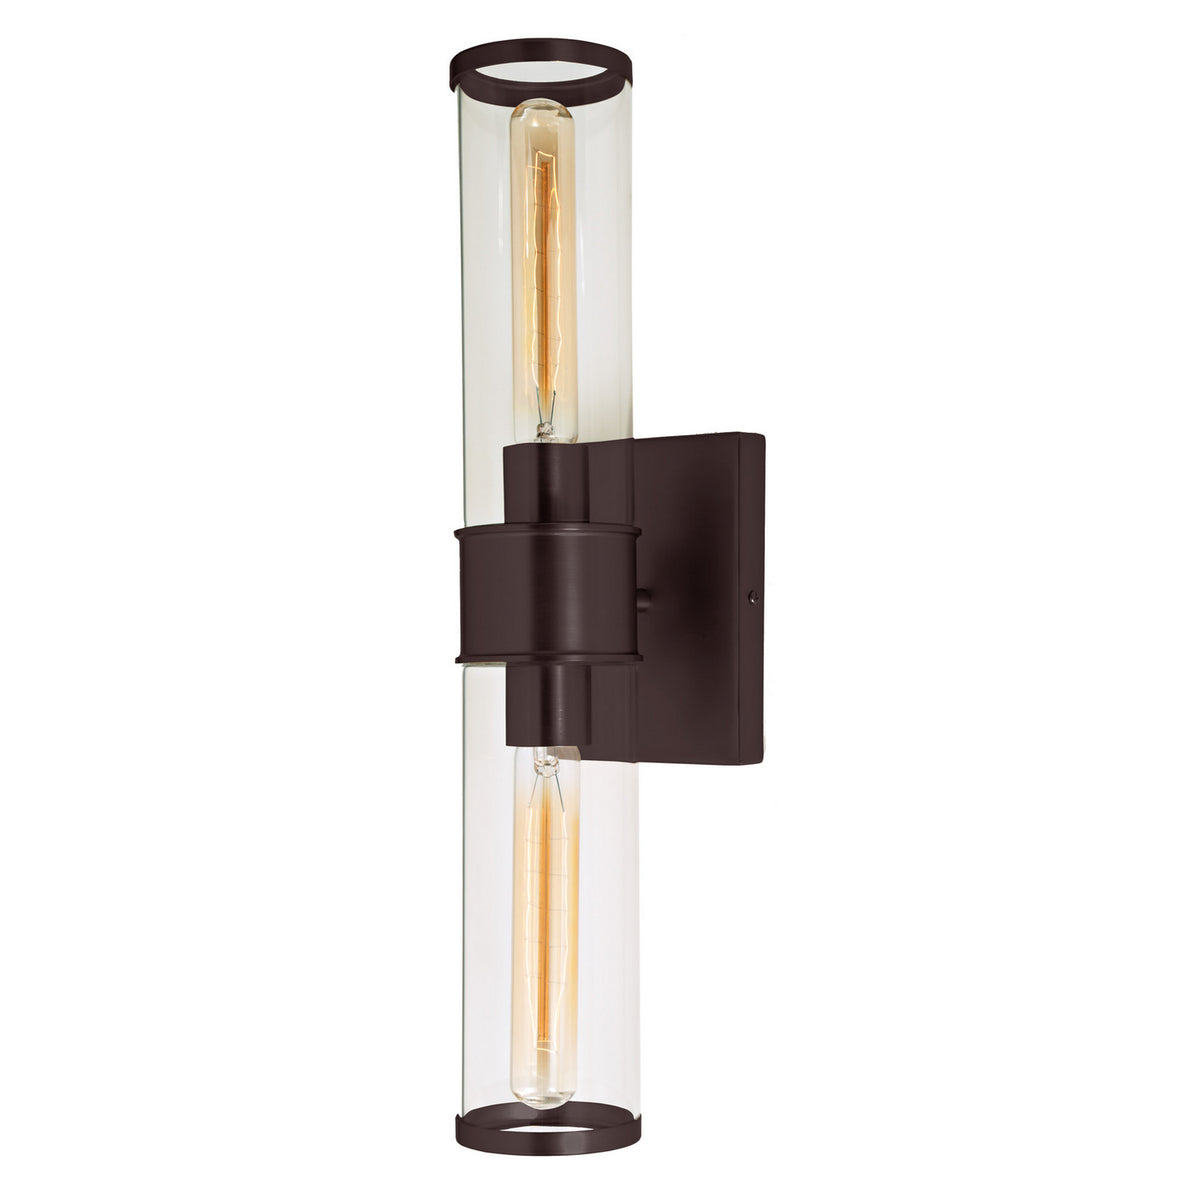 JVI Designs - 1232-08 - Two Light Wall Sconce - Gramercy - Oil Rubbed Bronze